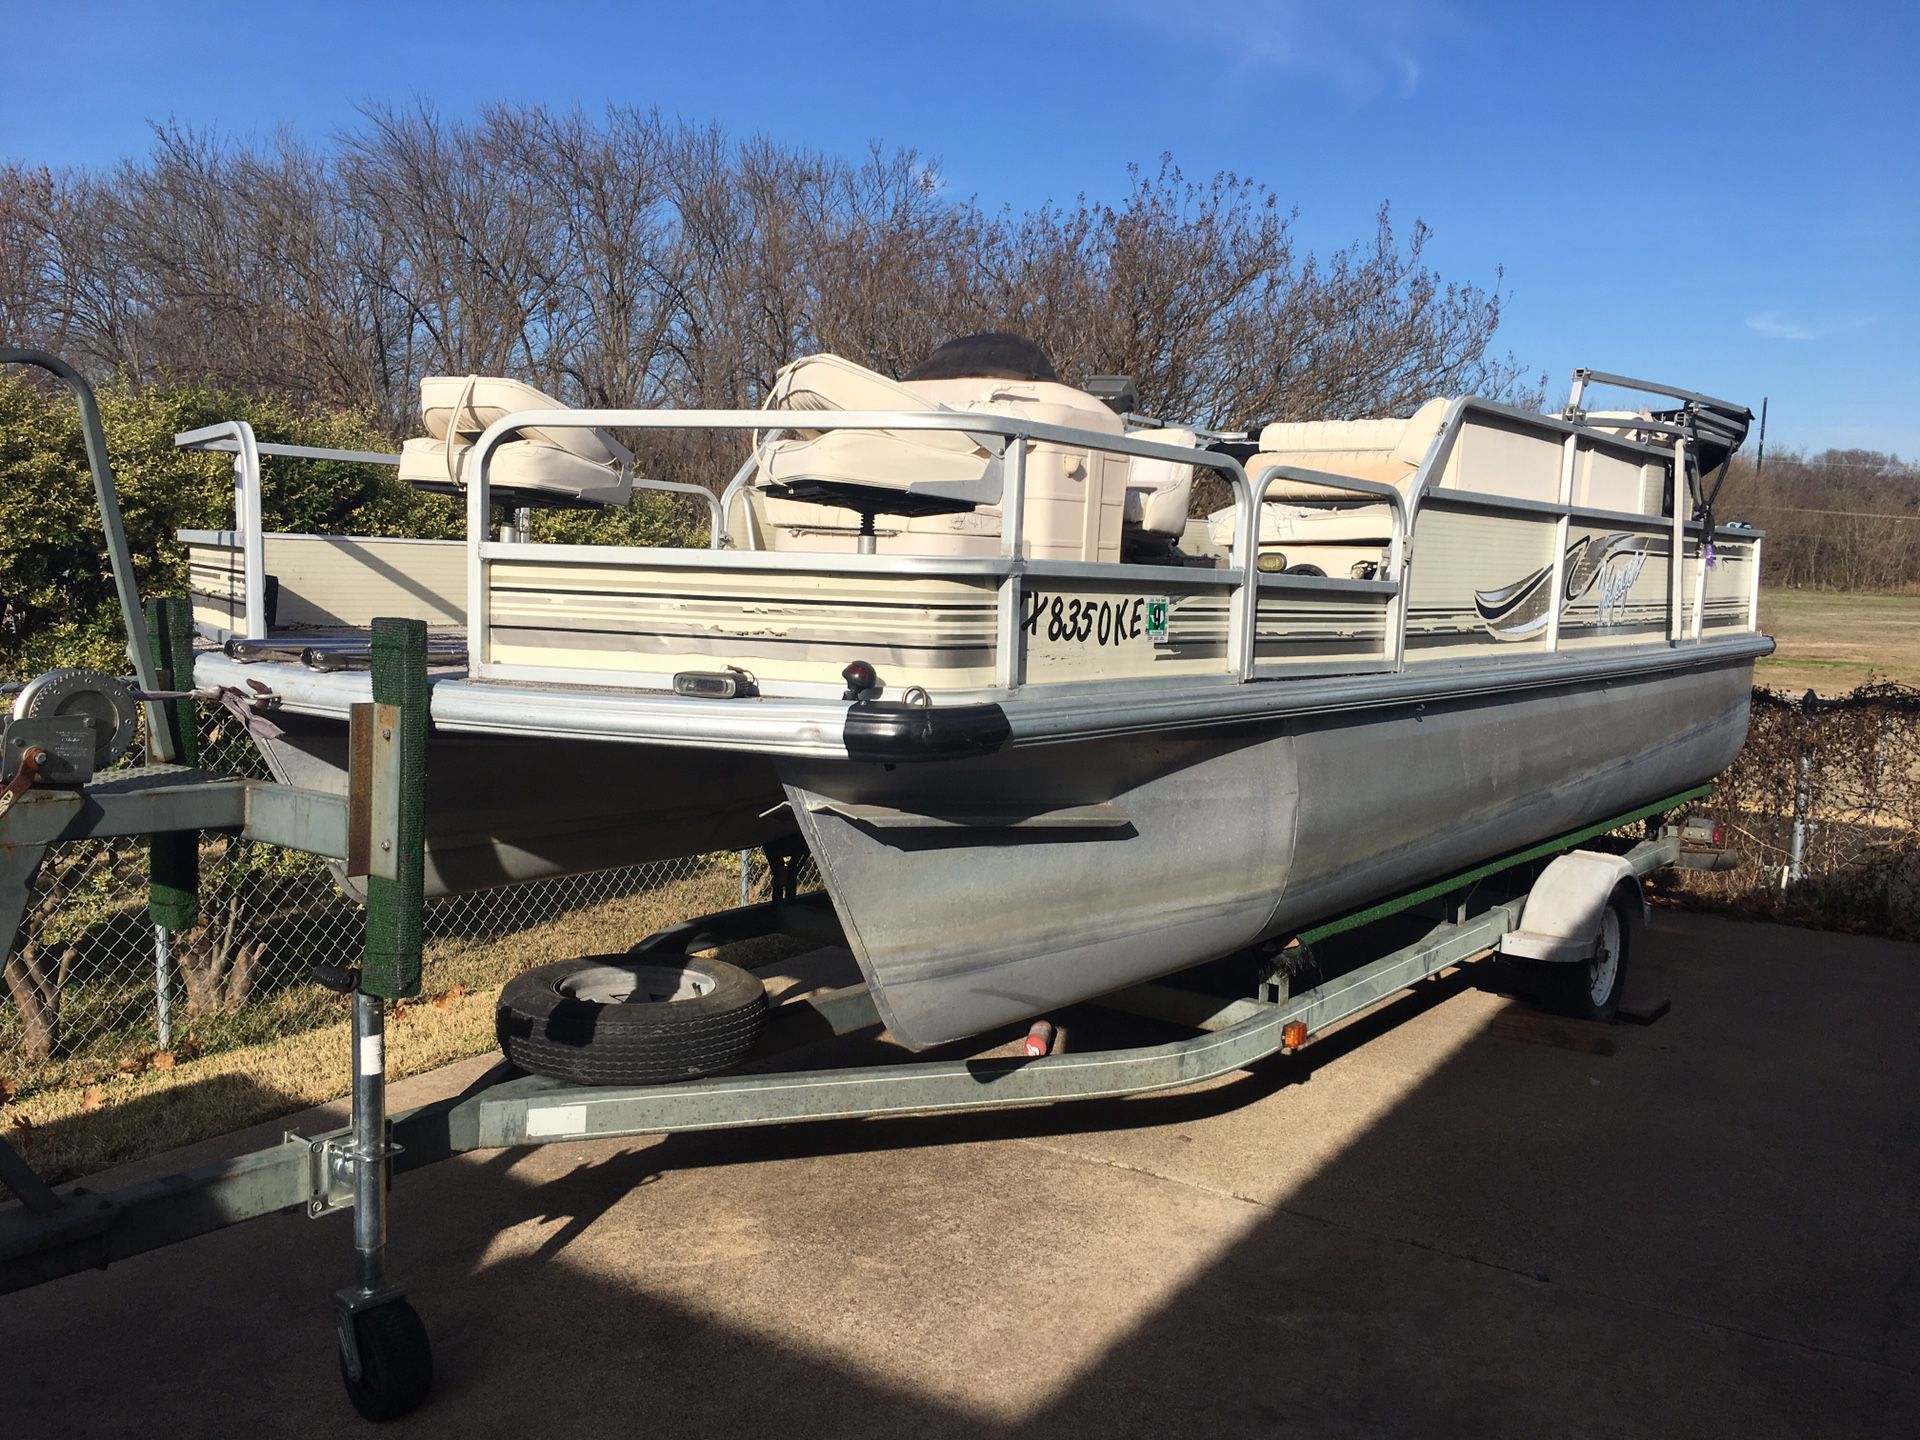 99 21 ft Voyager pontoon boat 90 hp mercury and boat trailer runs good Needs upholstery may trade for travel trailer